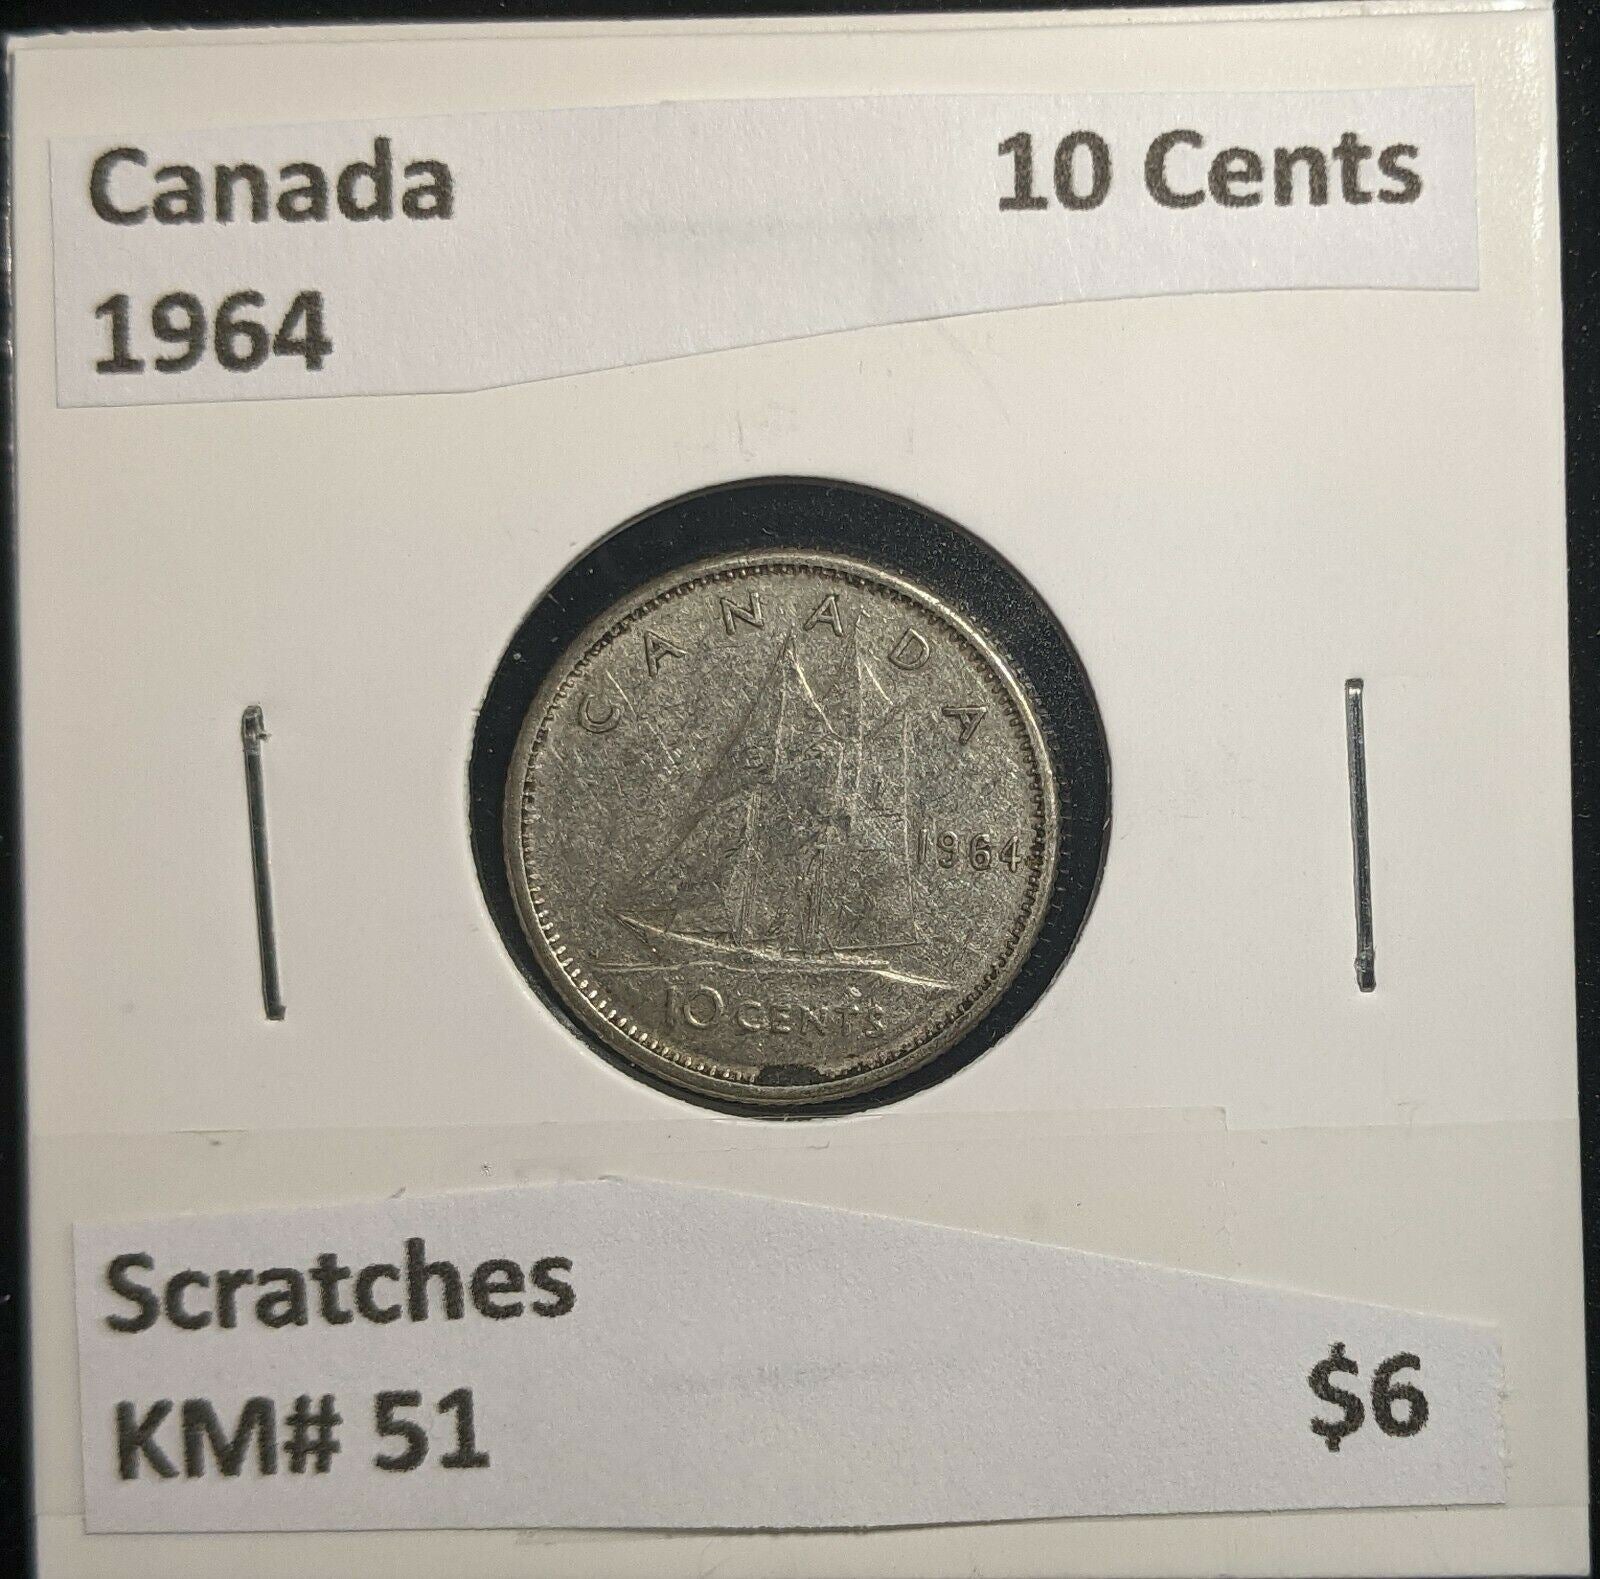 Canada 1964 10 Cents KM# 51 Scratches #069